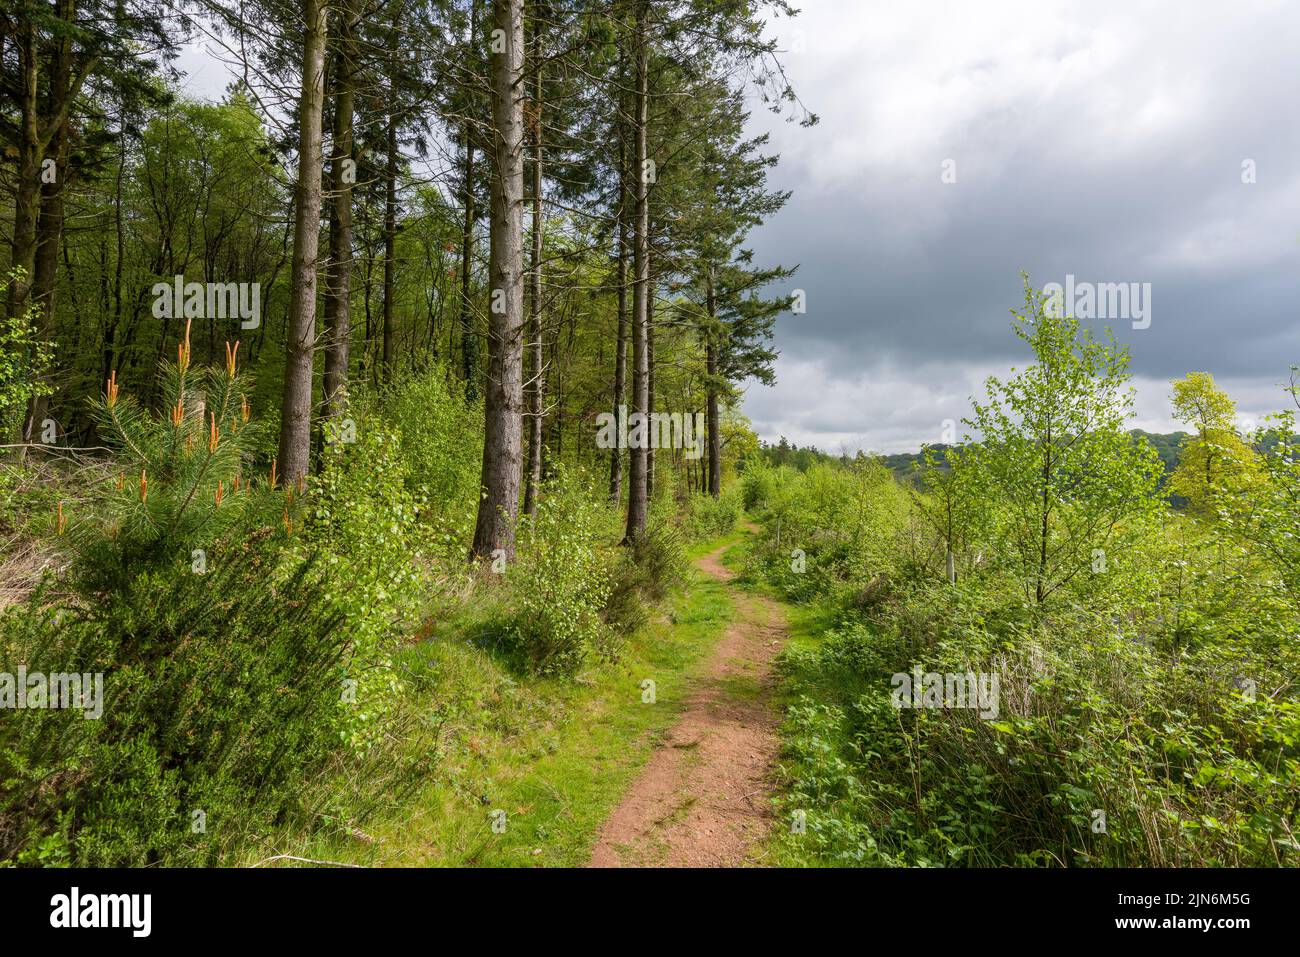 A footpath through Buncombe Wood on Buncombe Hill in the Quantock Hills near Cothelstone, Somerset, England. Stock Photo